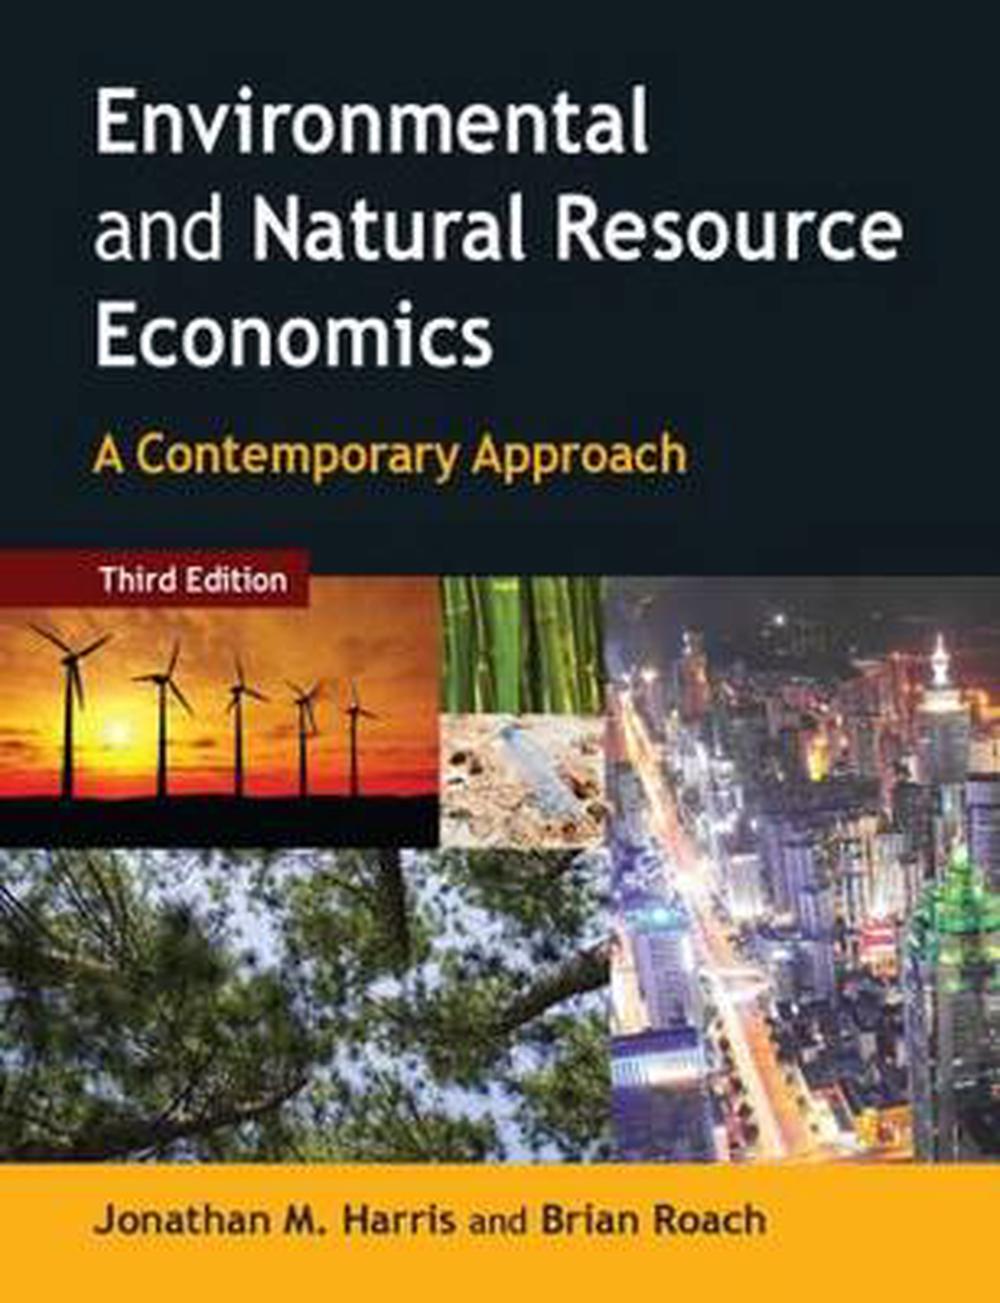 case study on environmental resources